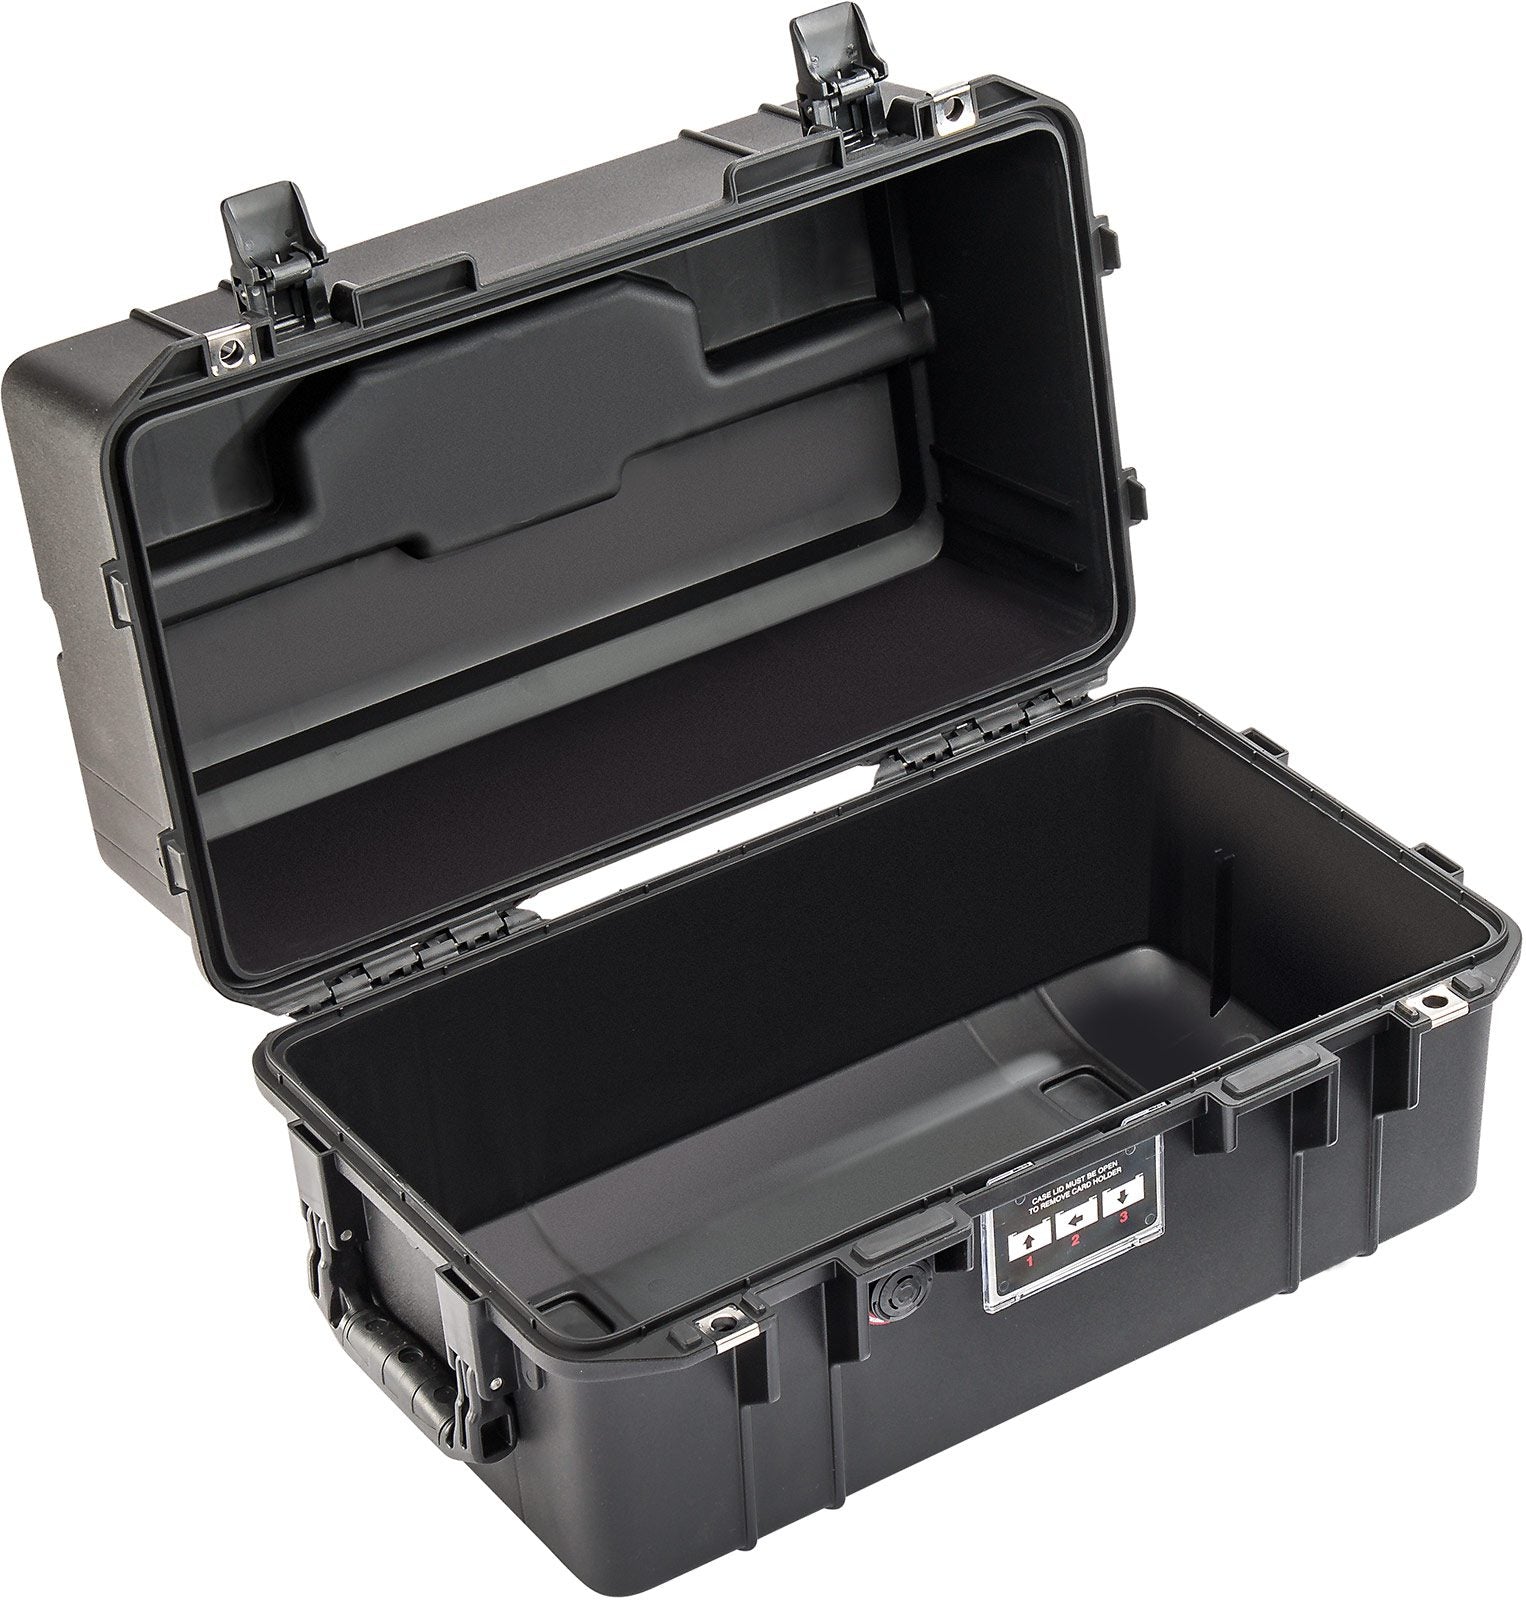 Pelican Products 1465 Air Case - Tactical & Duty Gear